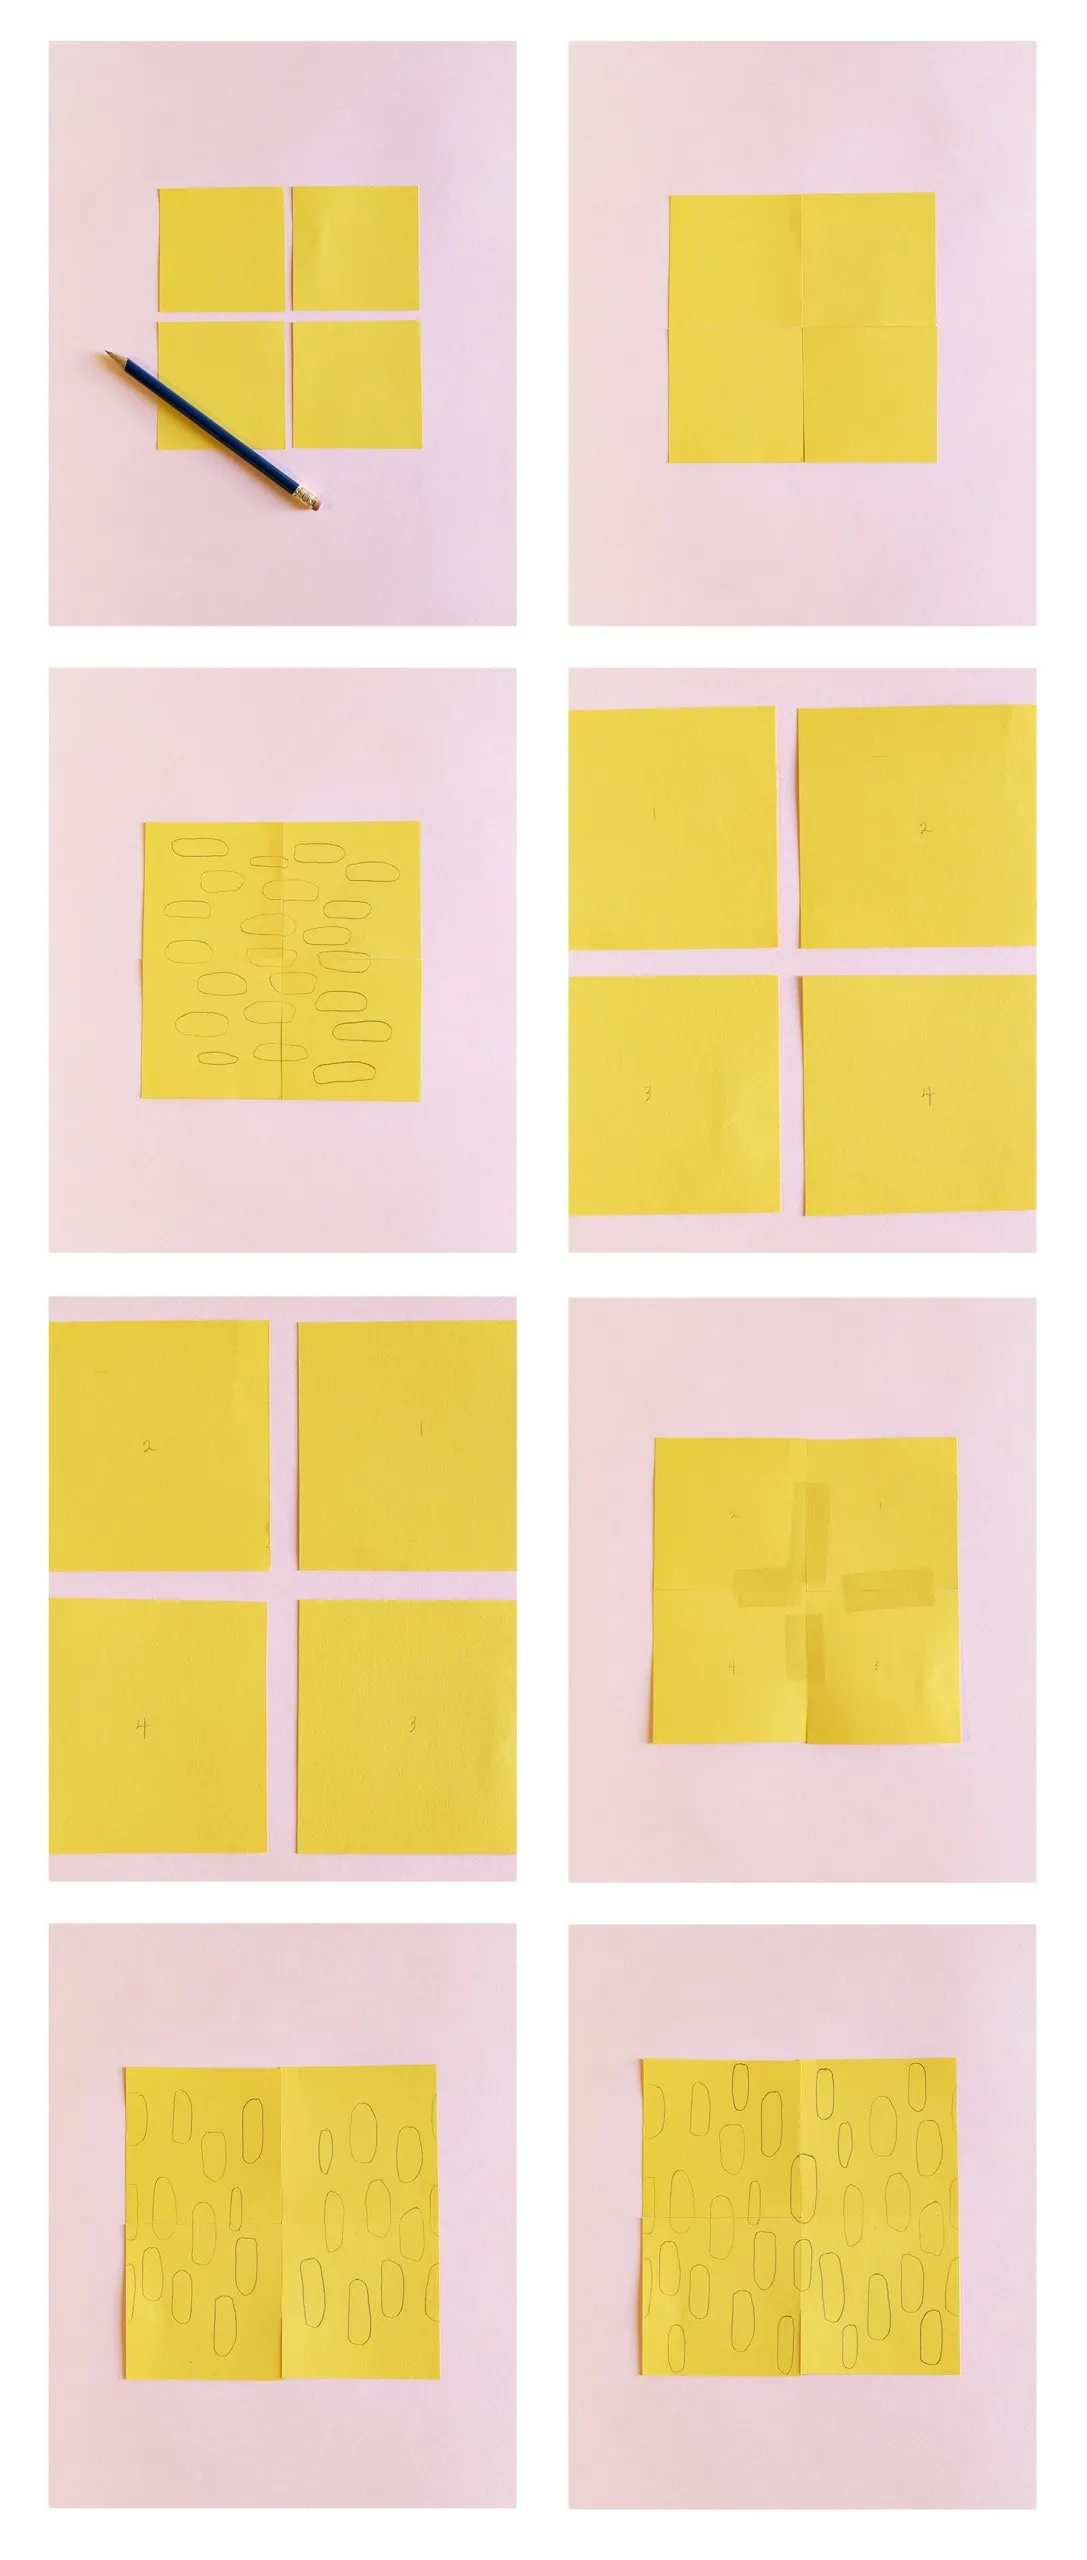 post-it note repeat pattern steps